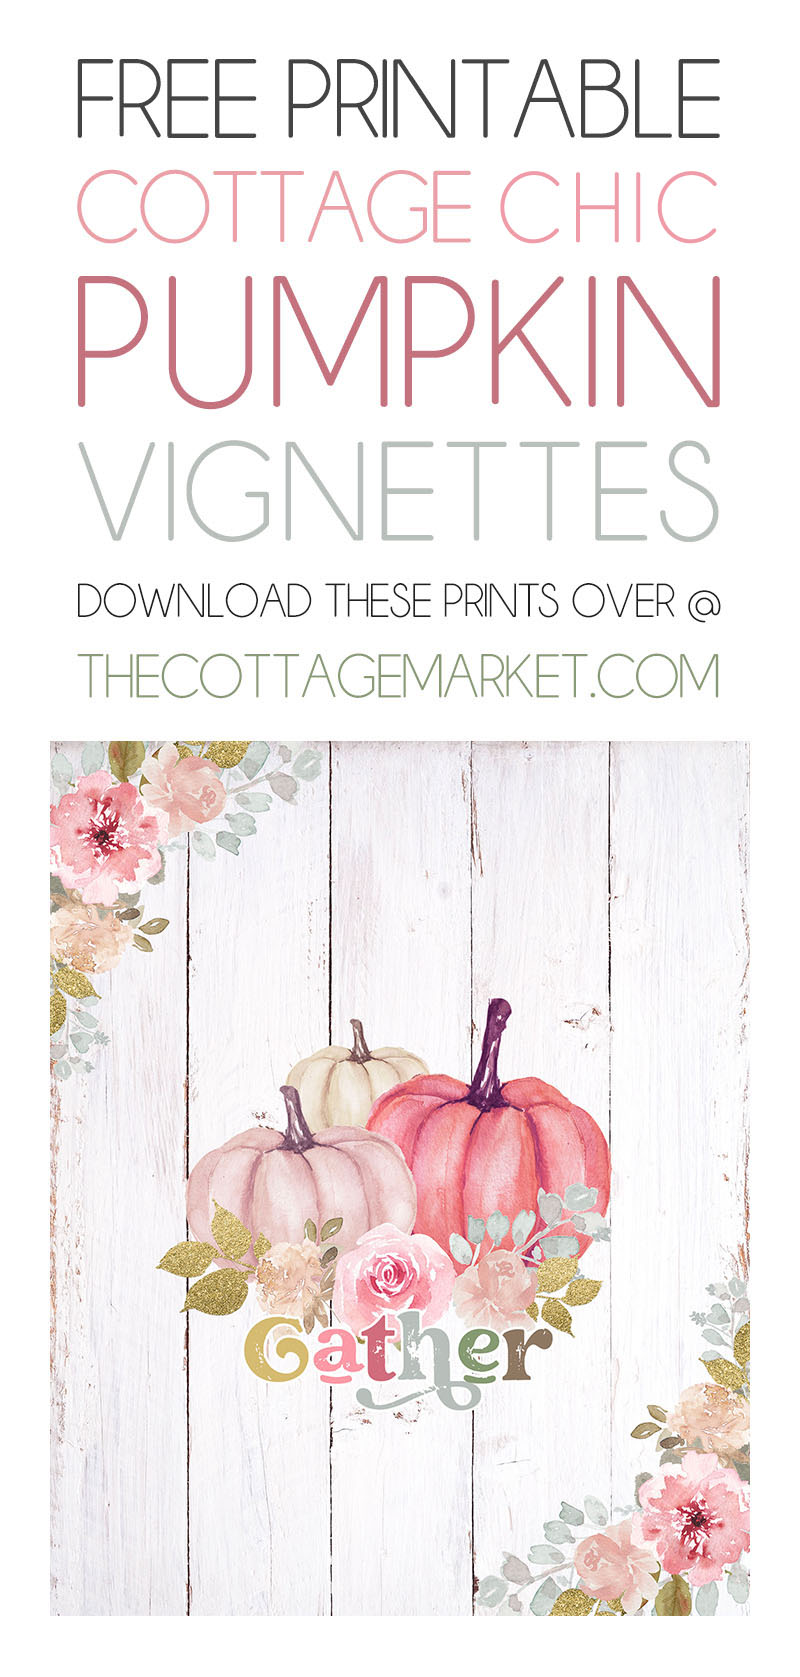 Come and checkout these Adorable Free Printable Cottagecore Pumpkin Vignettes that put a little Pink into your Fall!